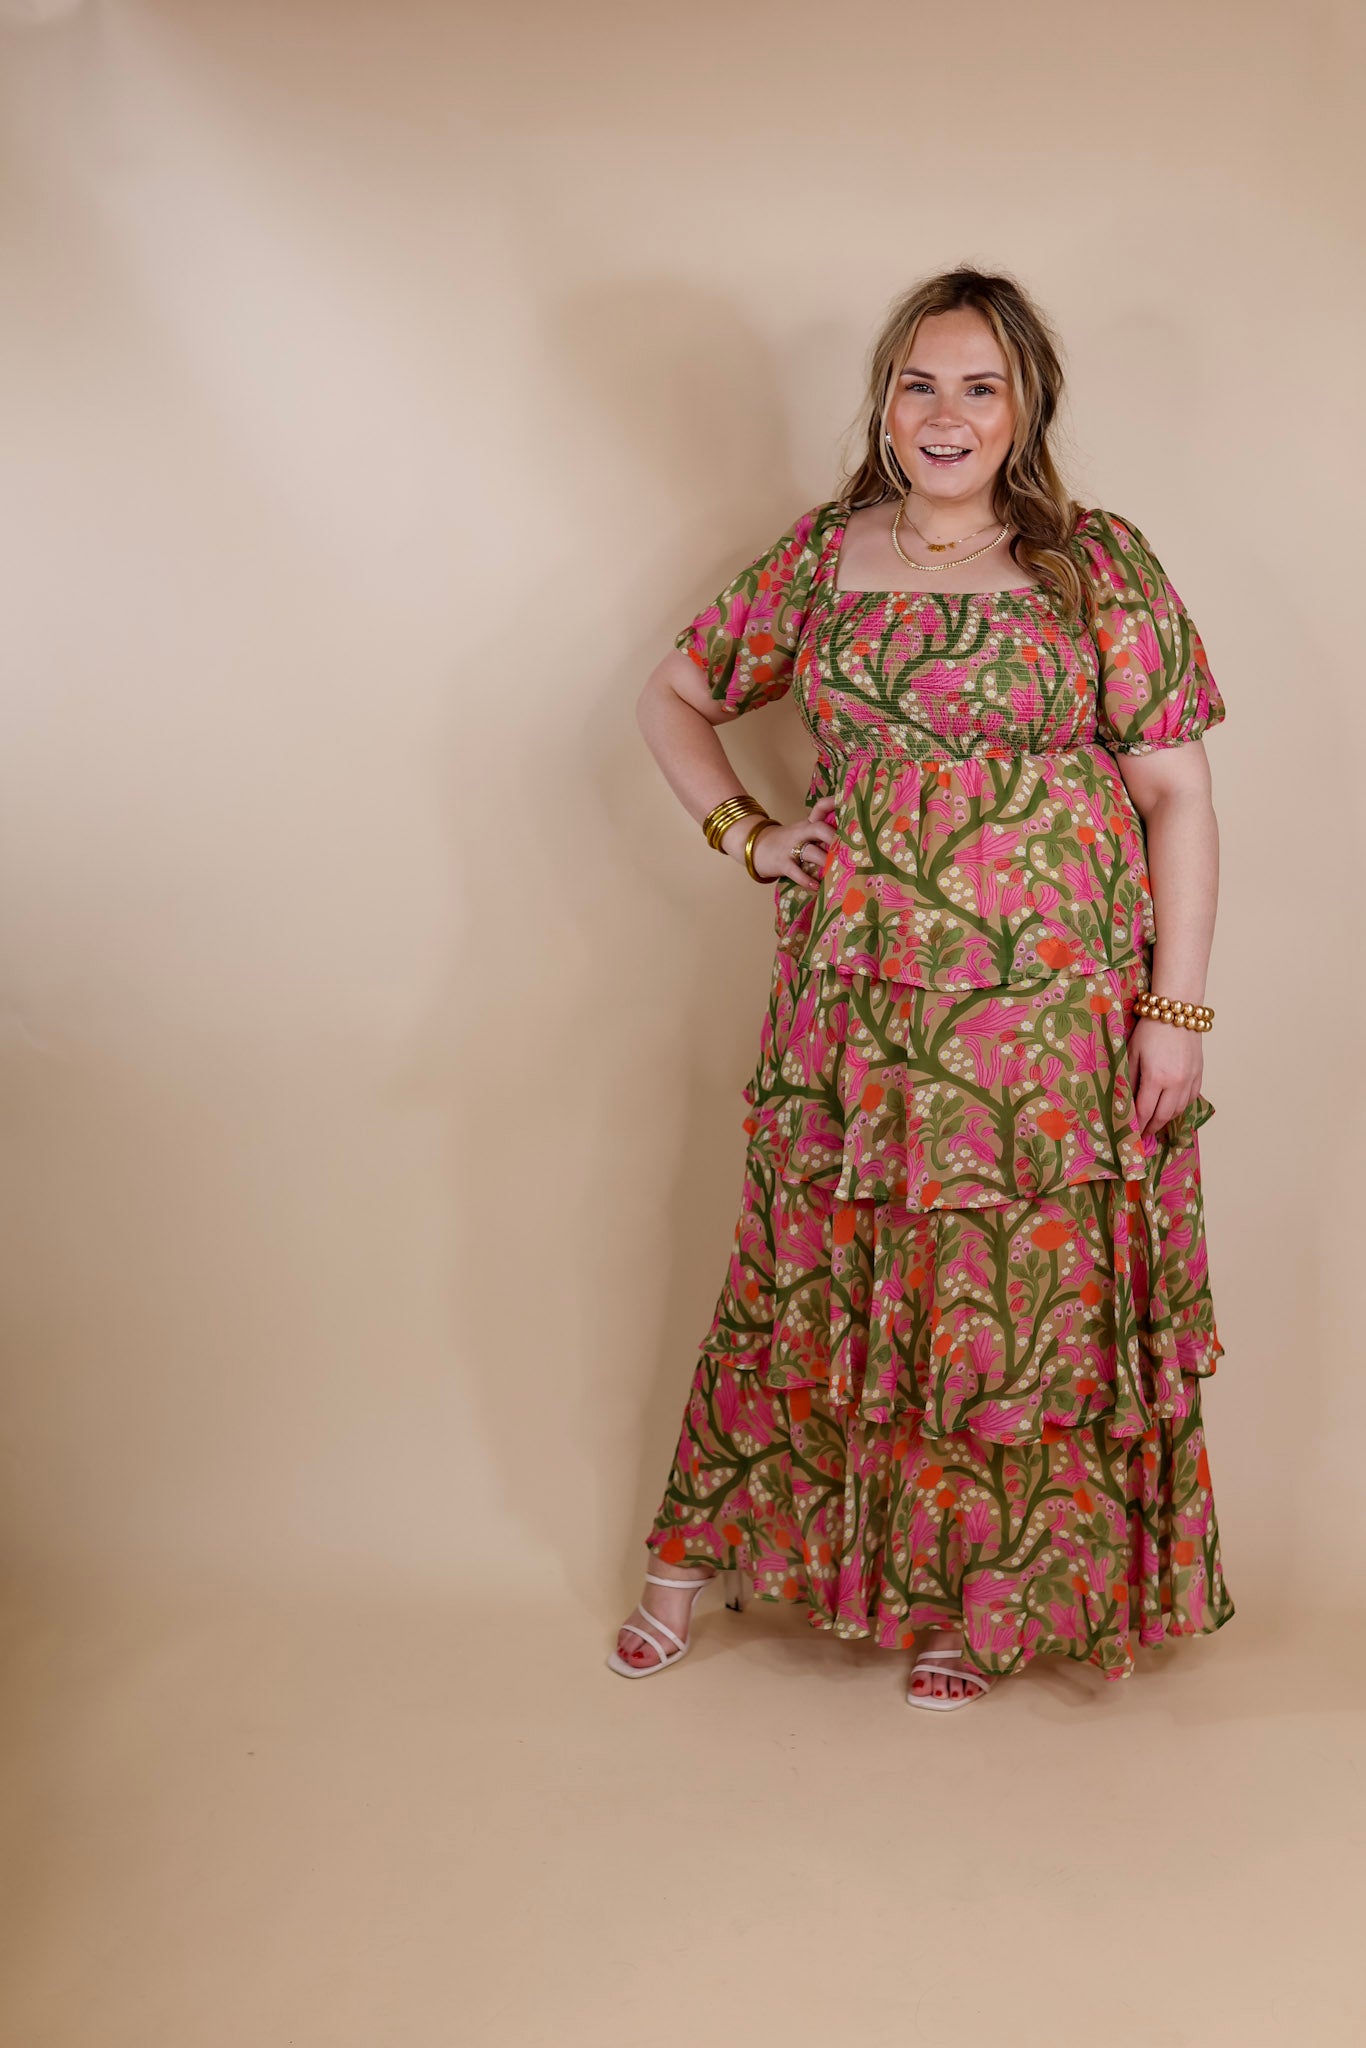 Fun Feeling Floral Tiered Maxi Dress with Smocked Balloon Sleeves in Green Mix - Giddy Up Glamour Boutique